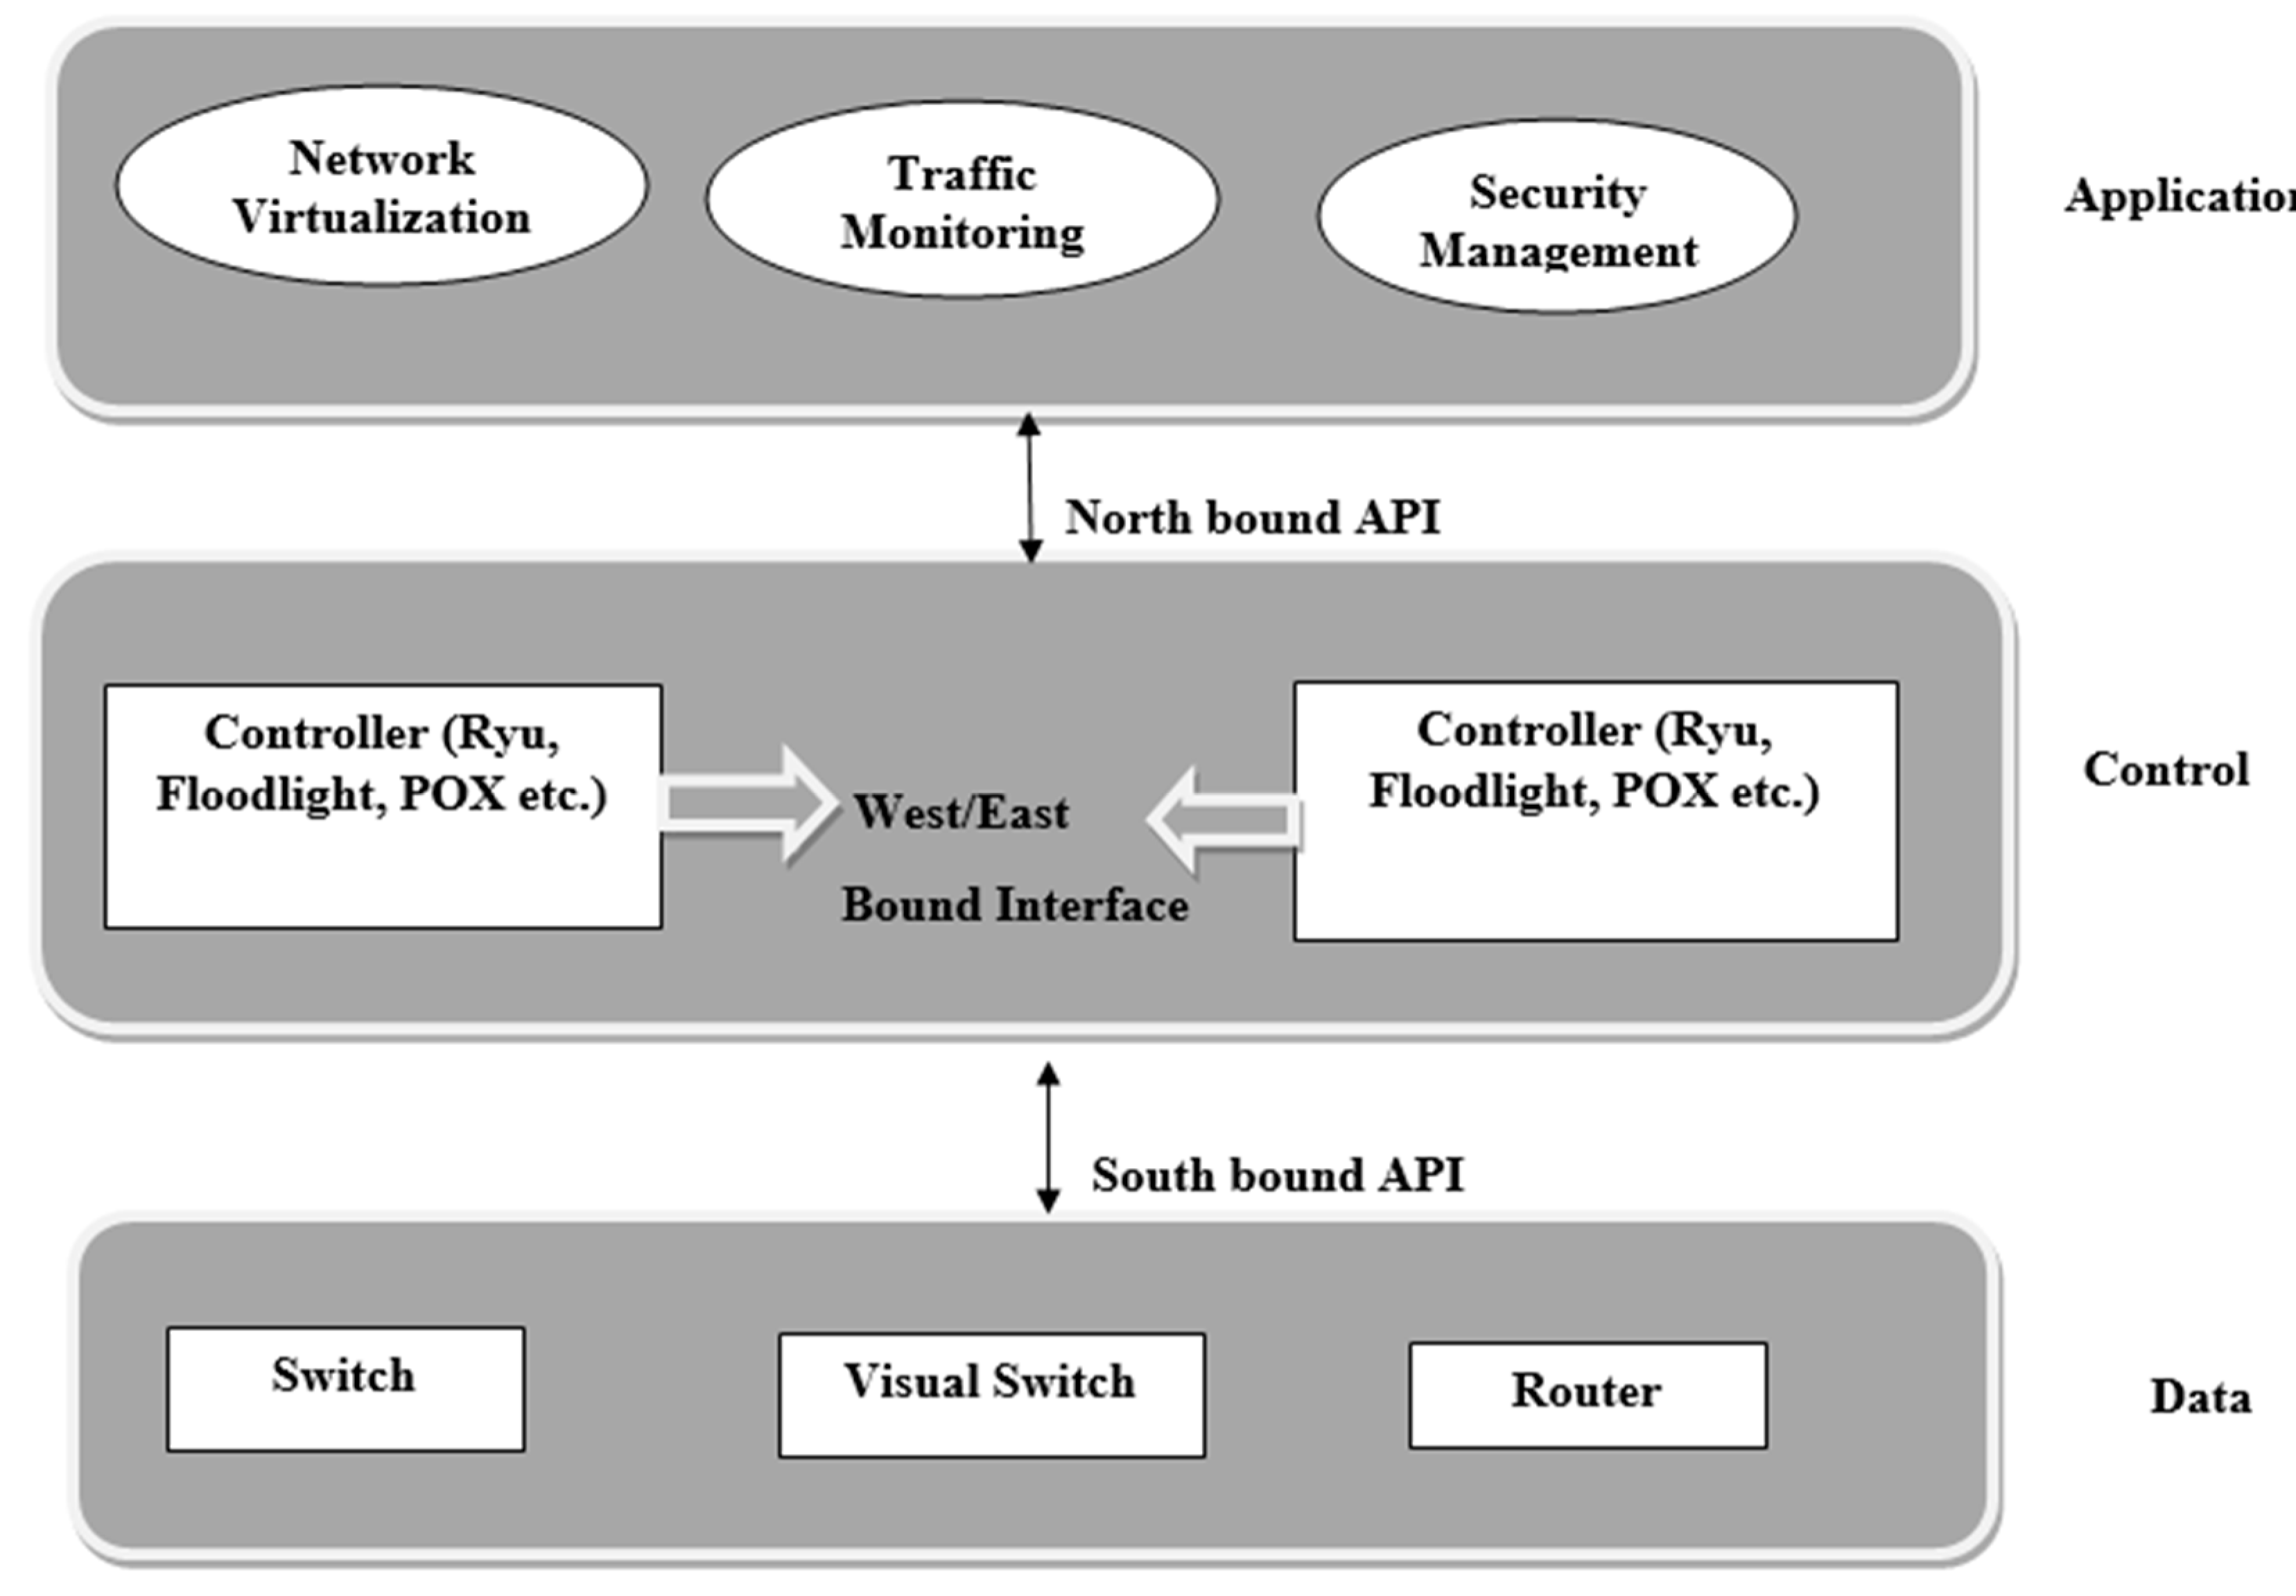 Sensors | Free Full-Text | Network Threat Detection Using Machine/Deep  Learning in SDN-Based Platforms: A Comprehensive Analysis of  State-of-the-Art Solutions, Discussion, Challenges, and Future Research  Direction